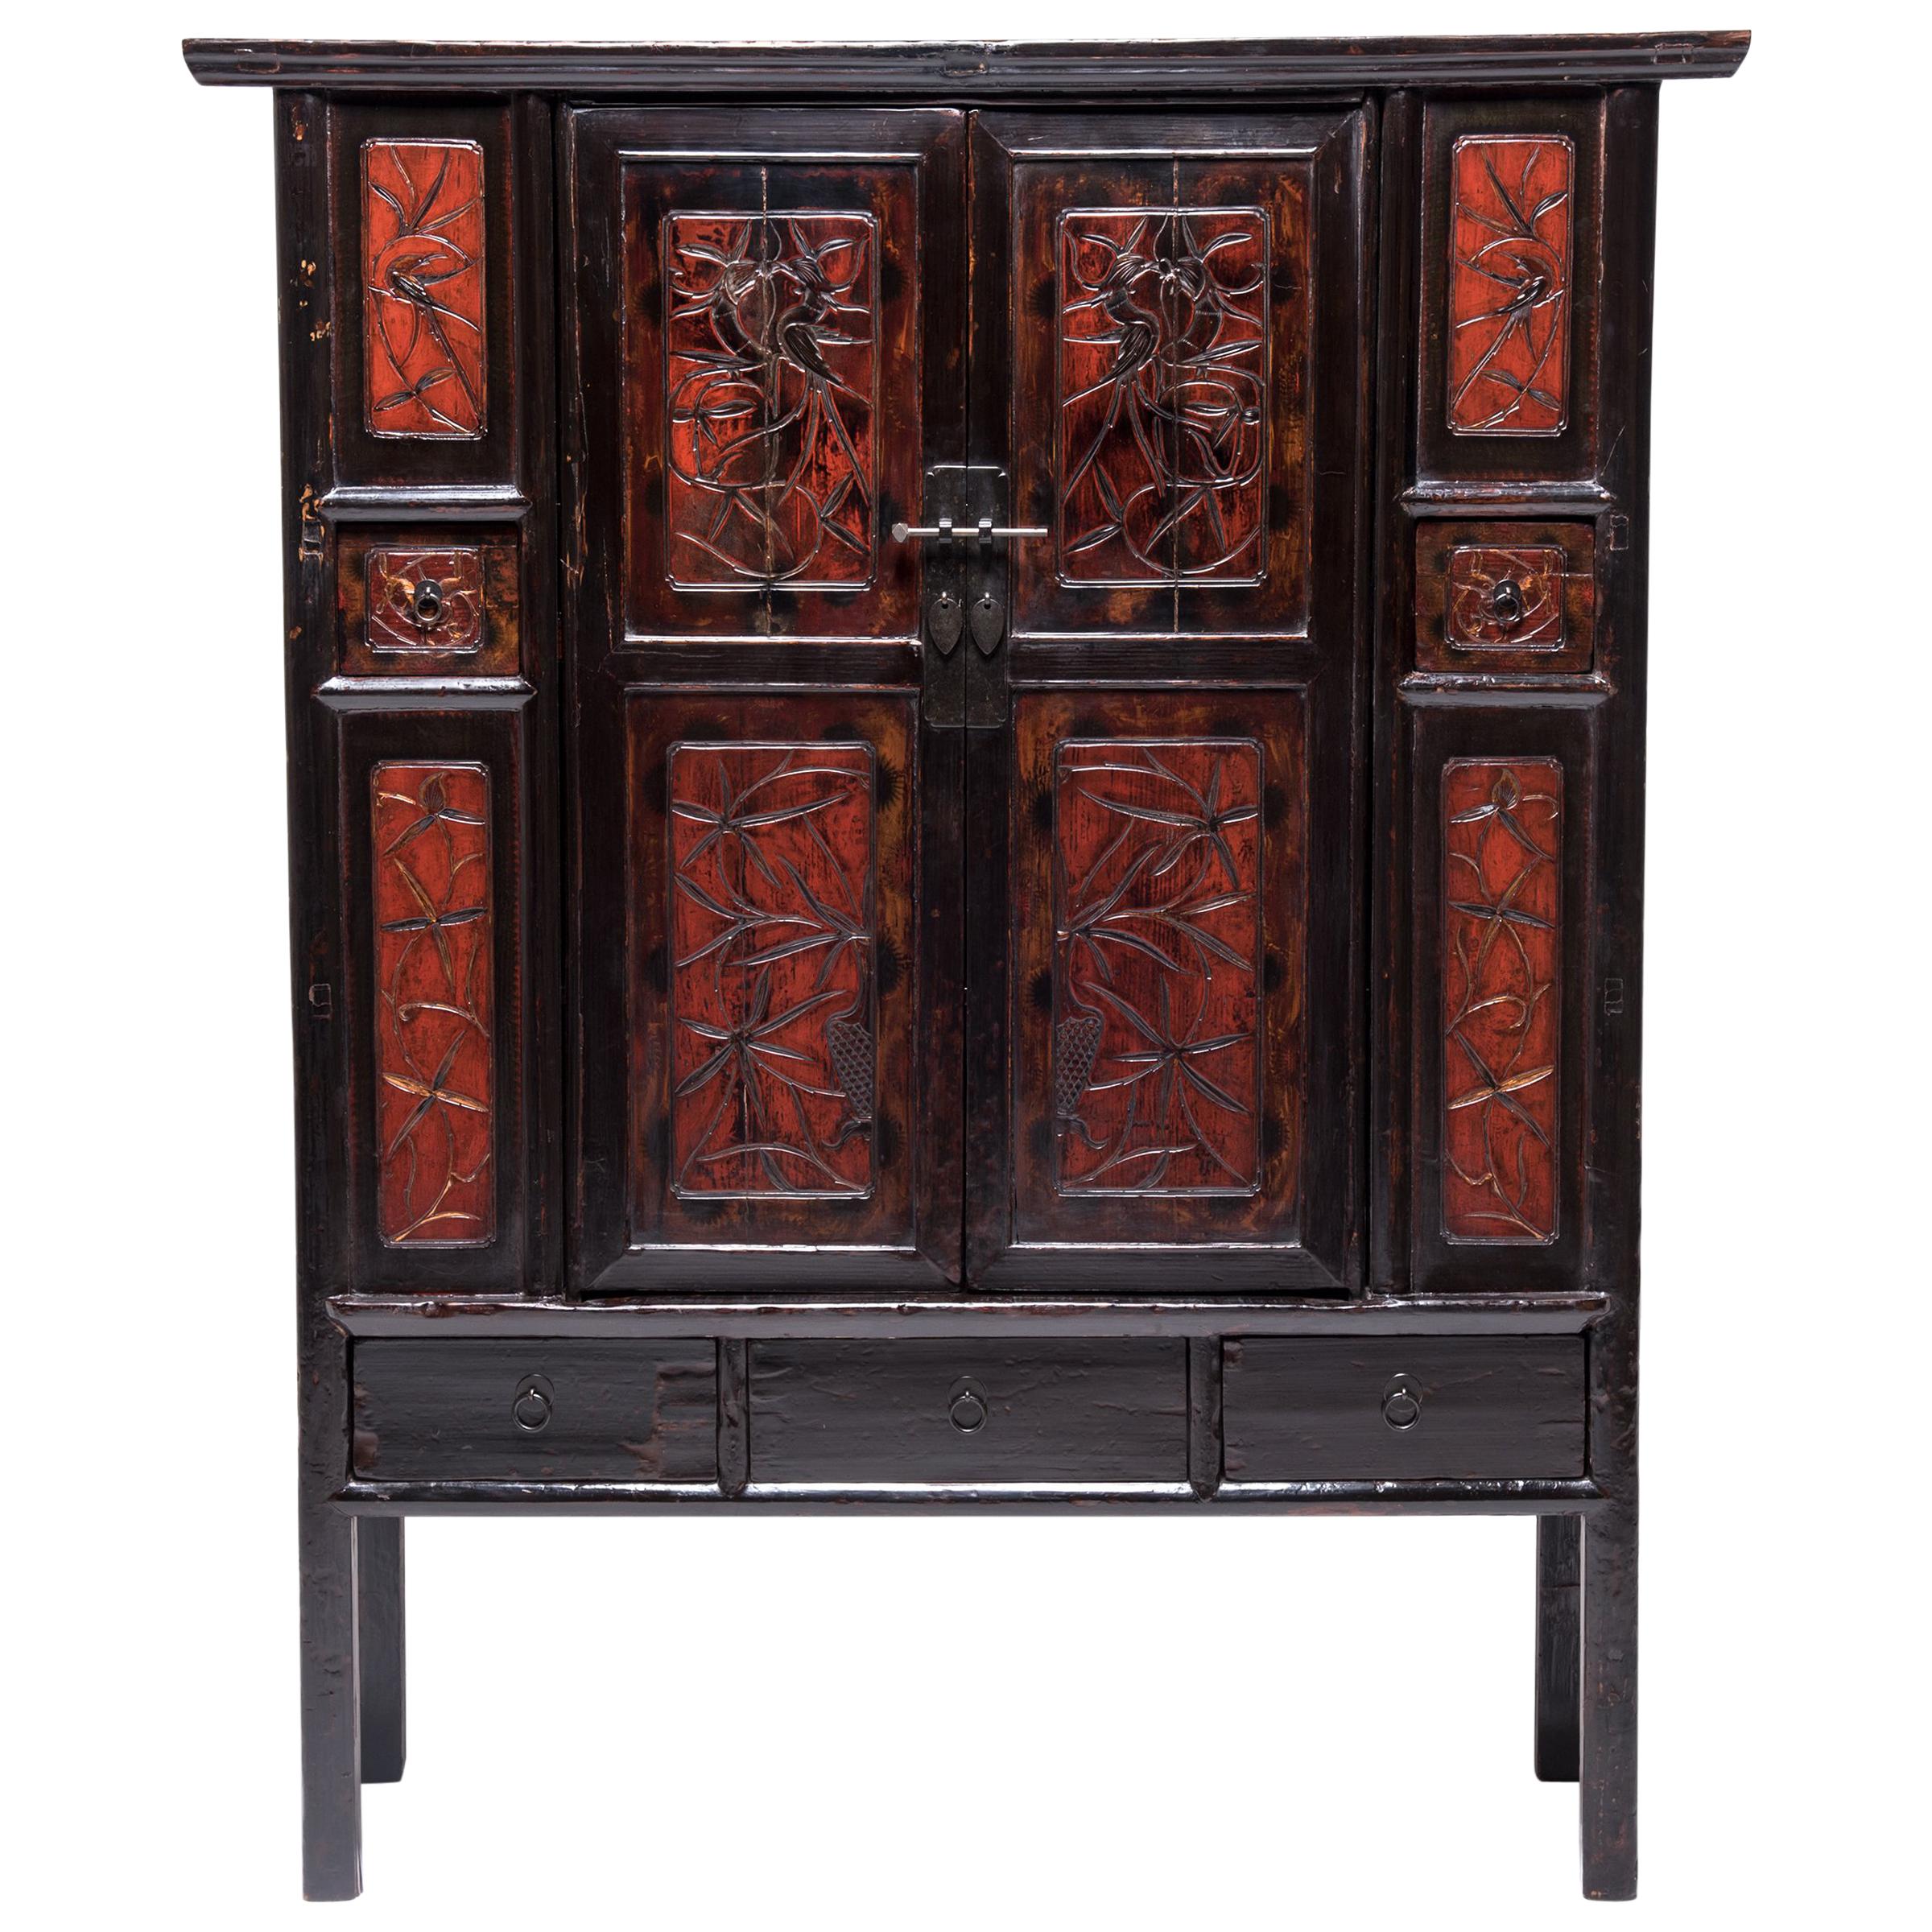 Chinese Painted Two-Door Cabinet, c. 1850